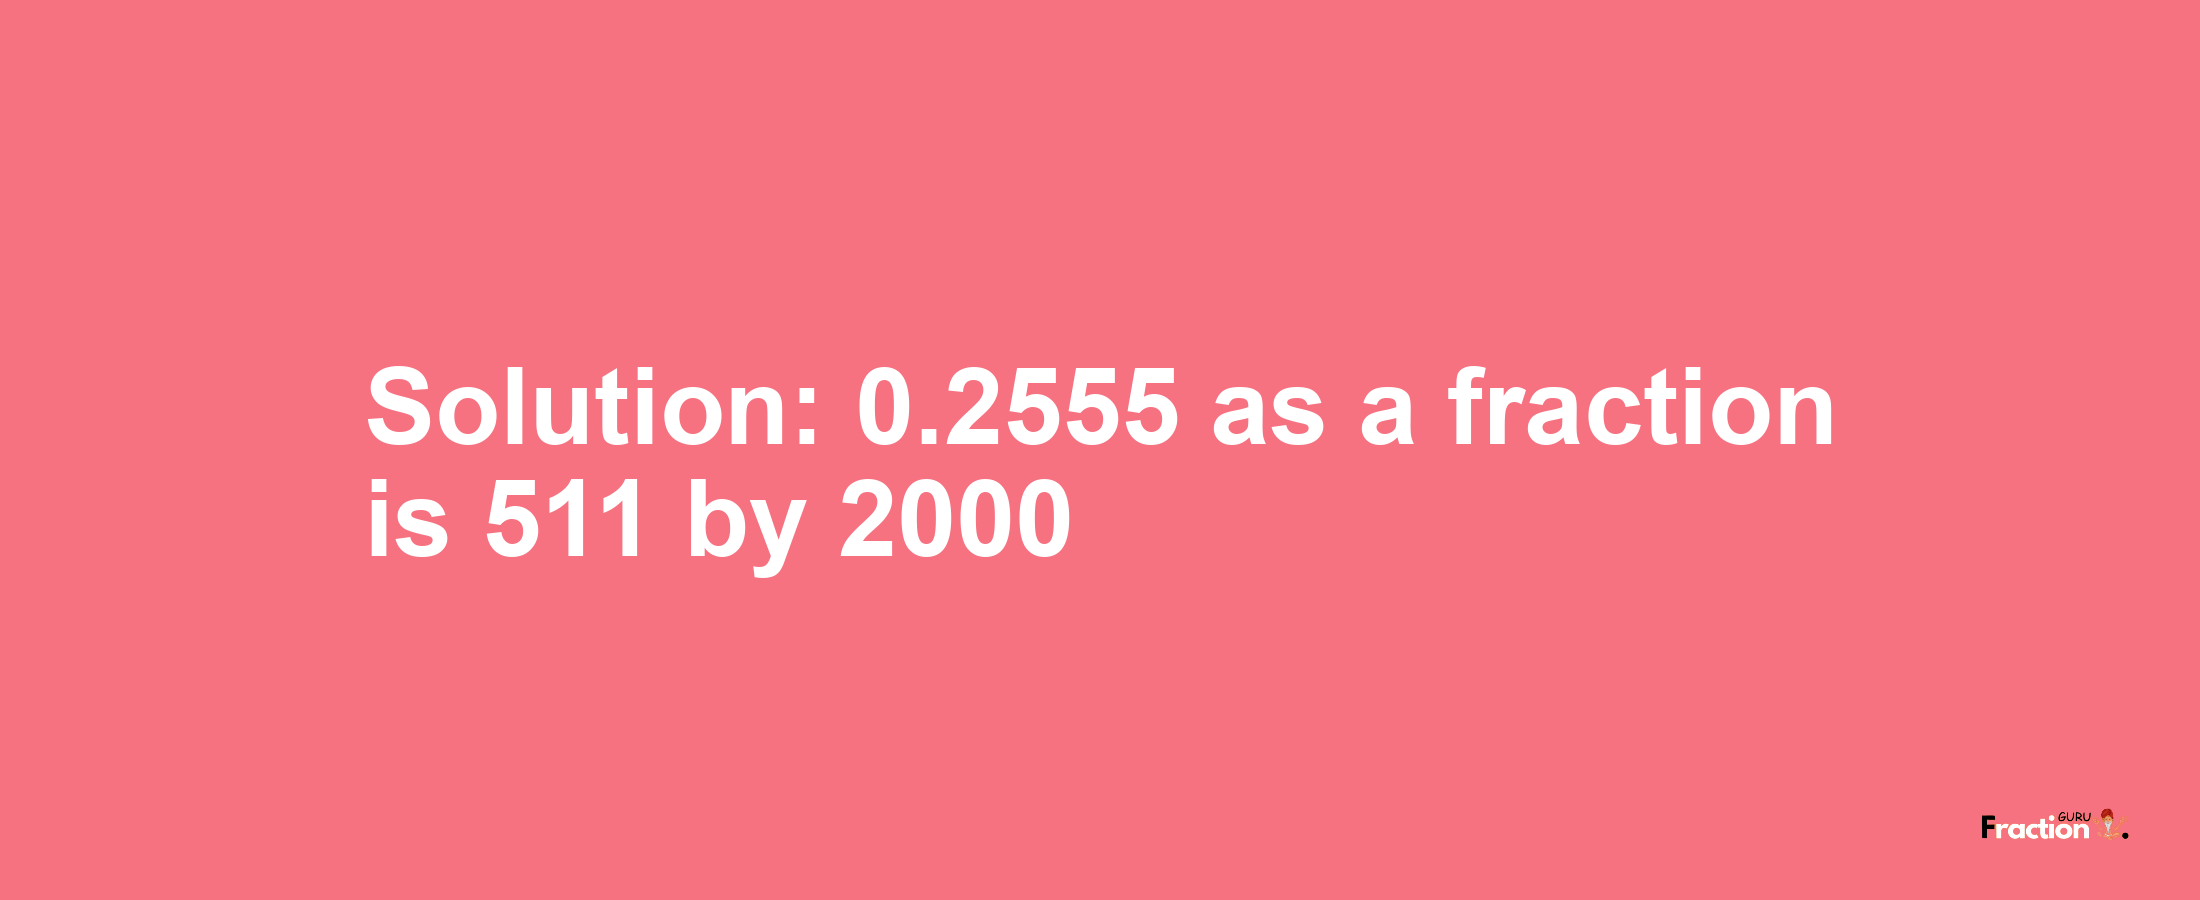 Solution:0.2555 as a fraction is 511/2000